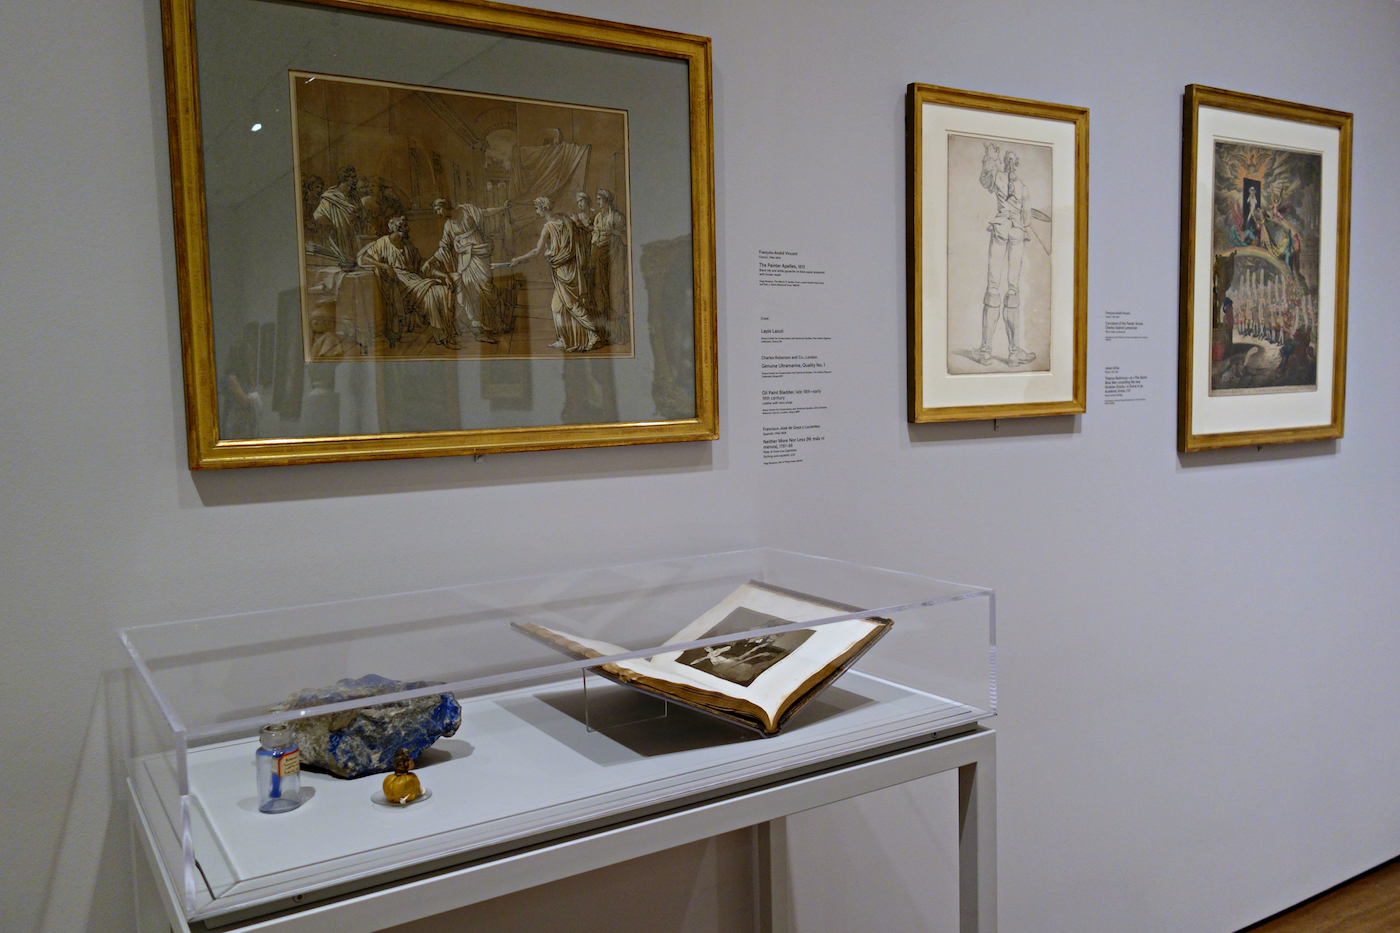 Installation view of 'Artists and Their Tools' at the Harvard Art Museums (photo by the author for Hyperallergic)